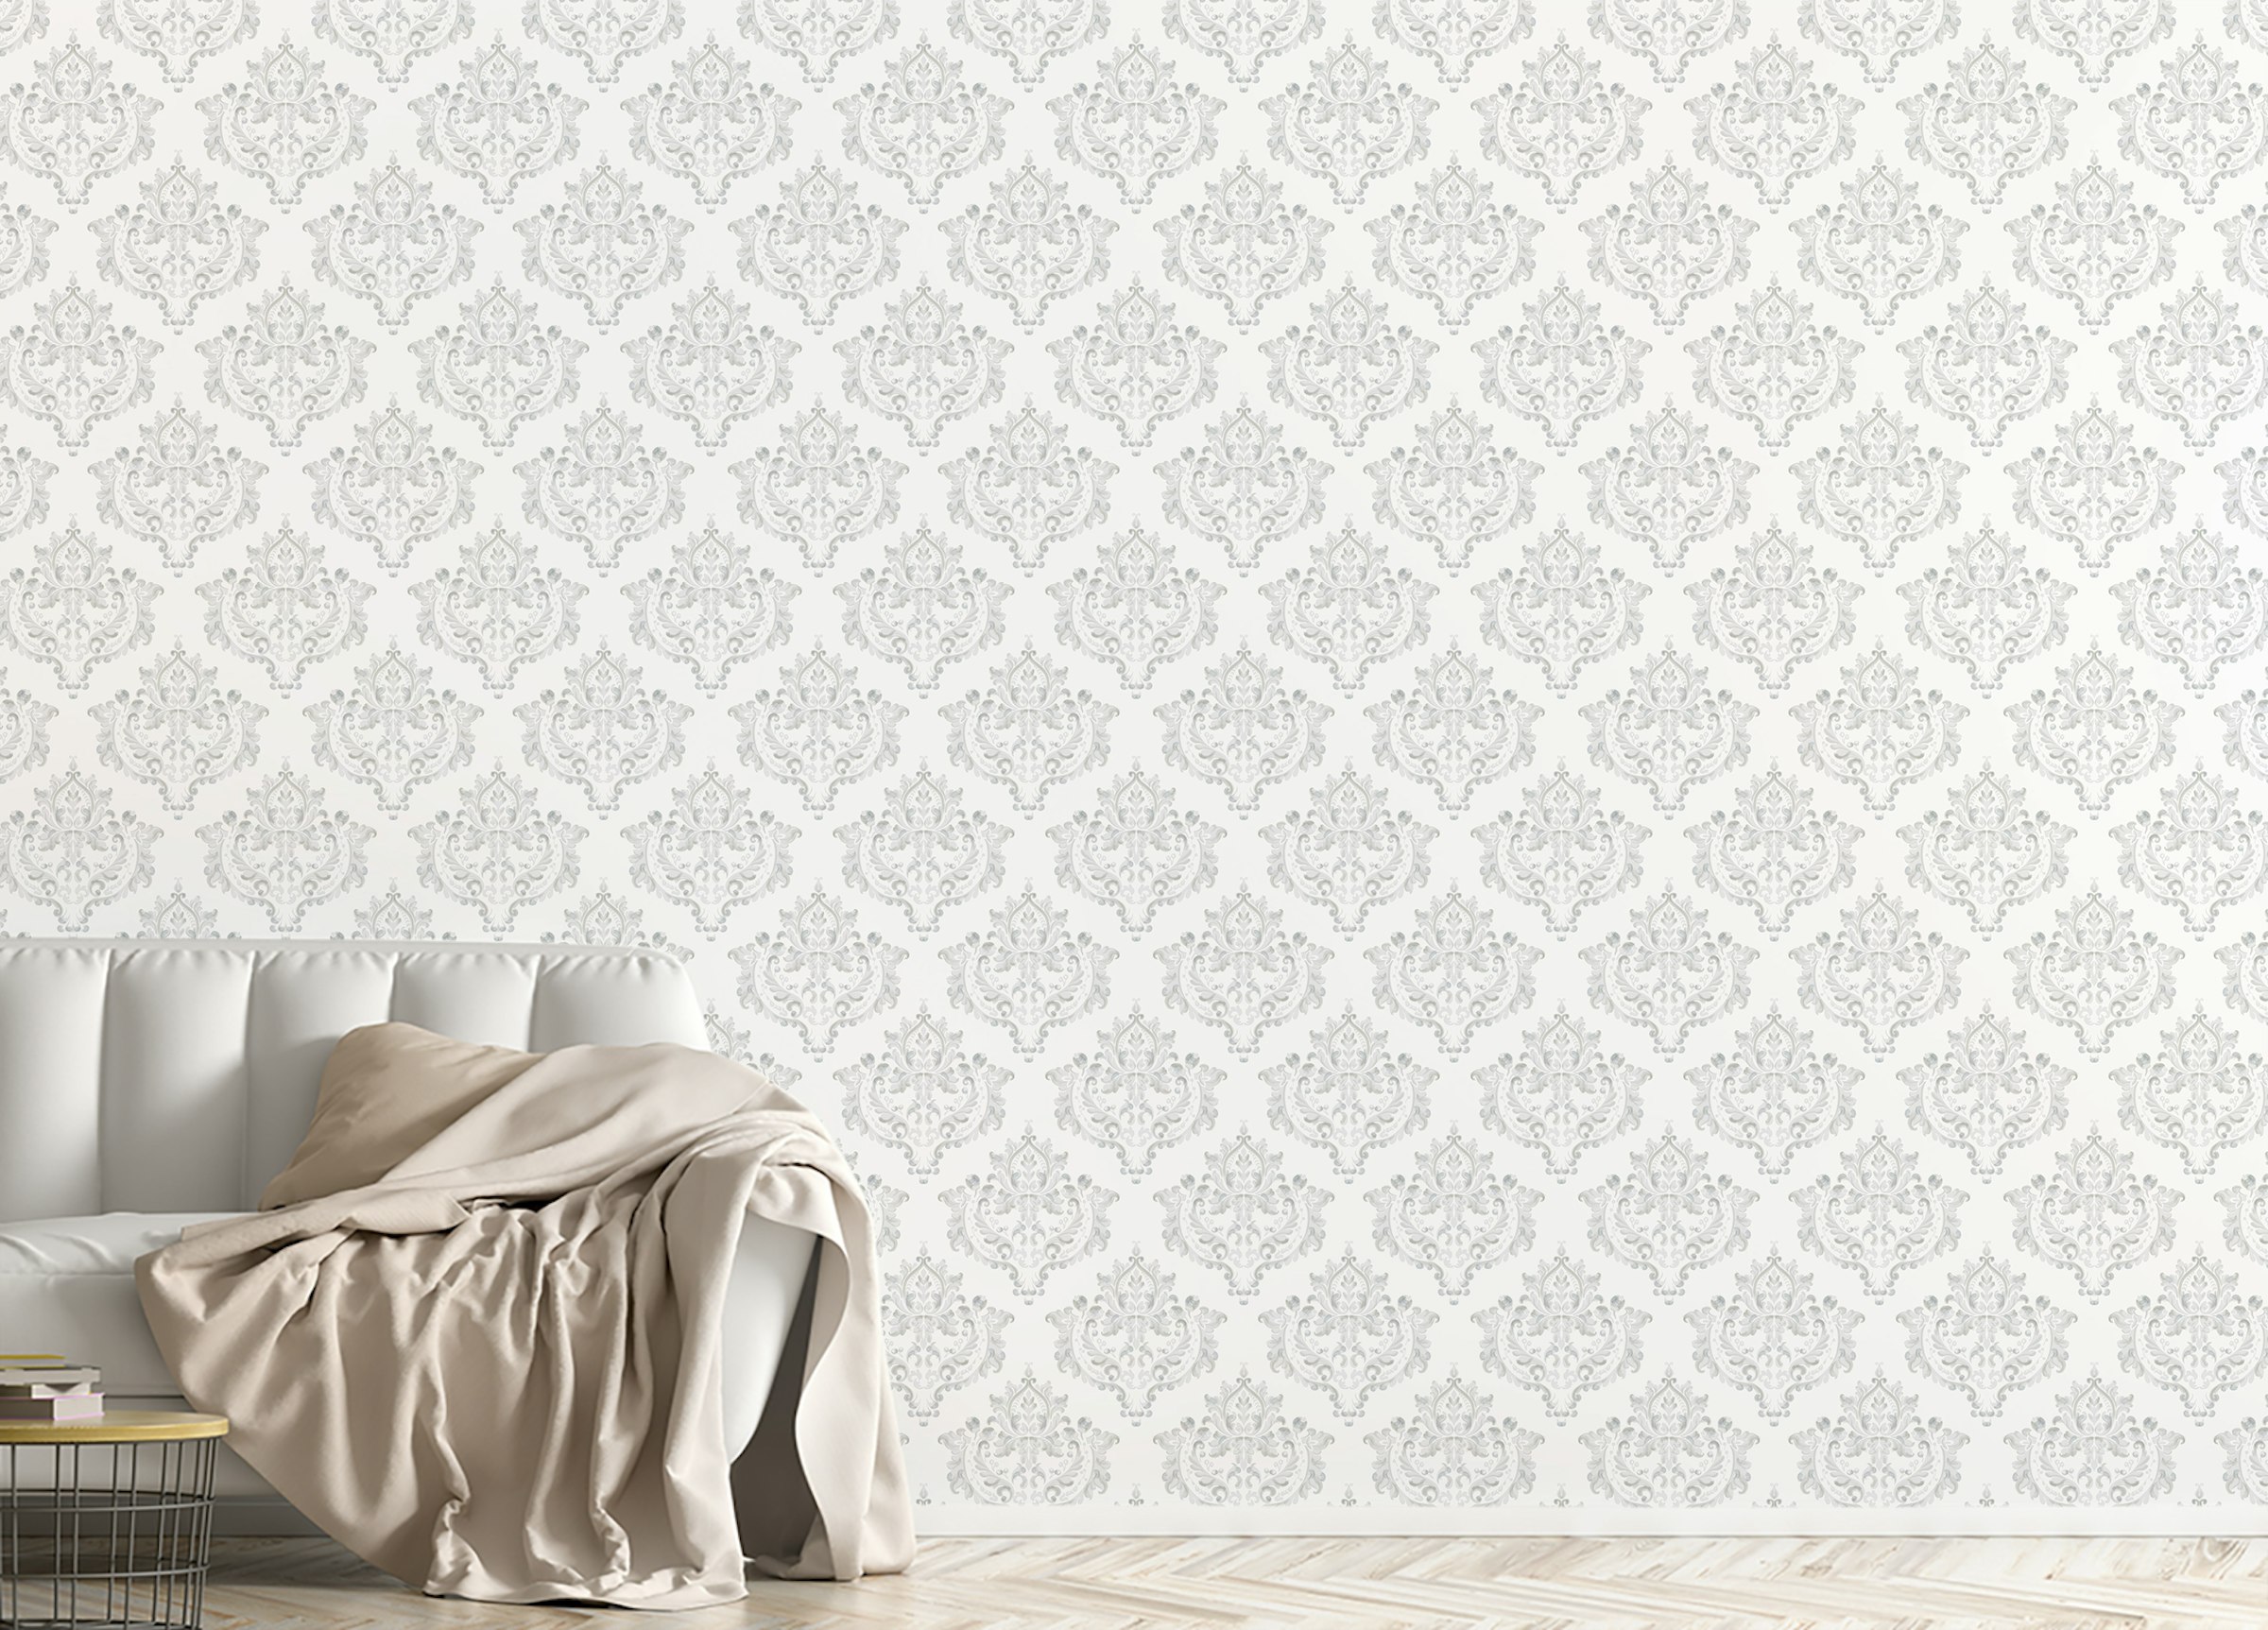 Peel and Stick White and Grey Color Damask Repeat Pattern Wallpaper